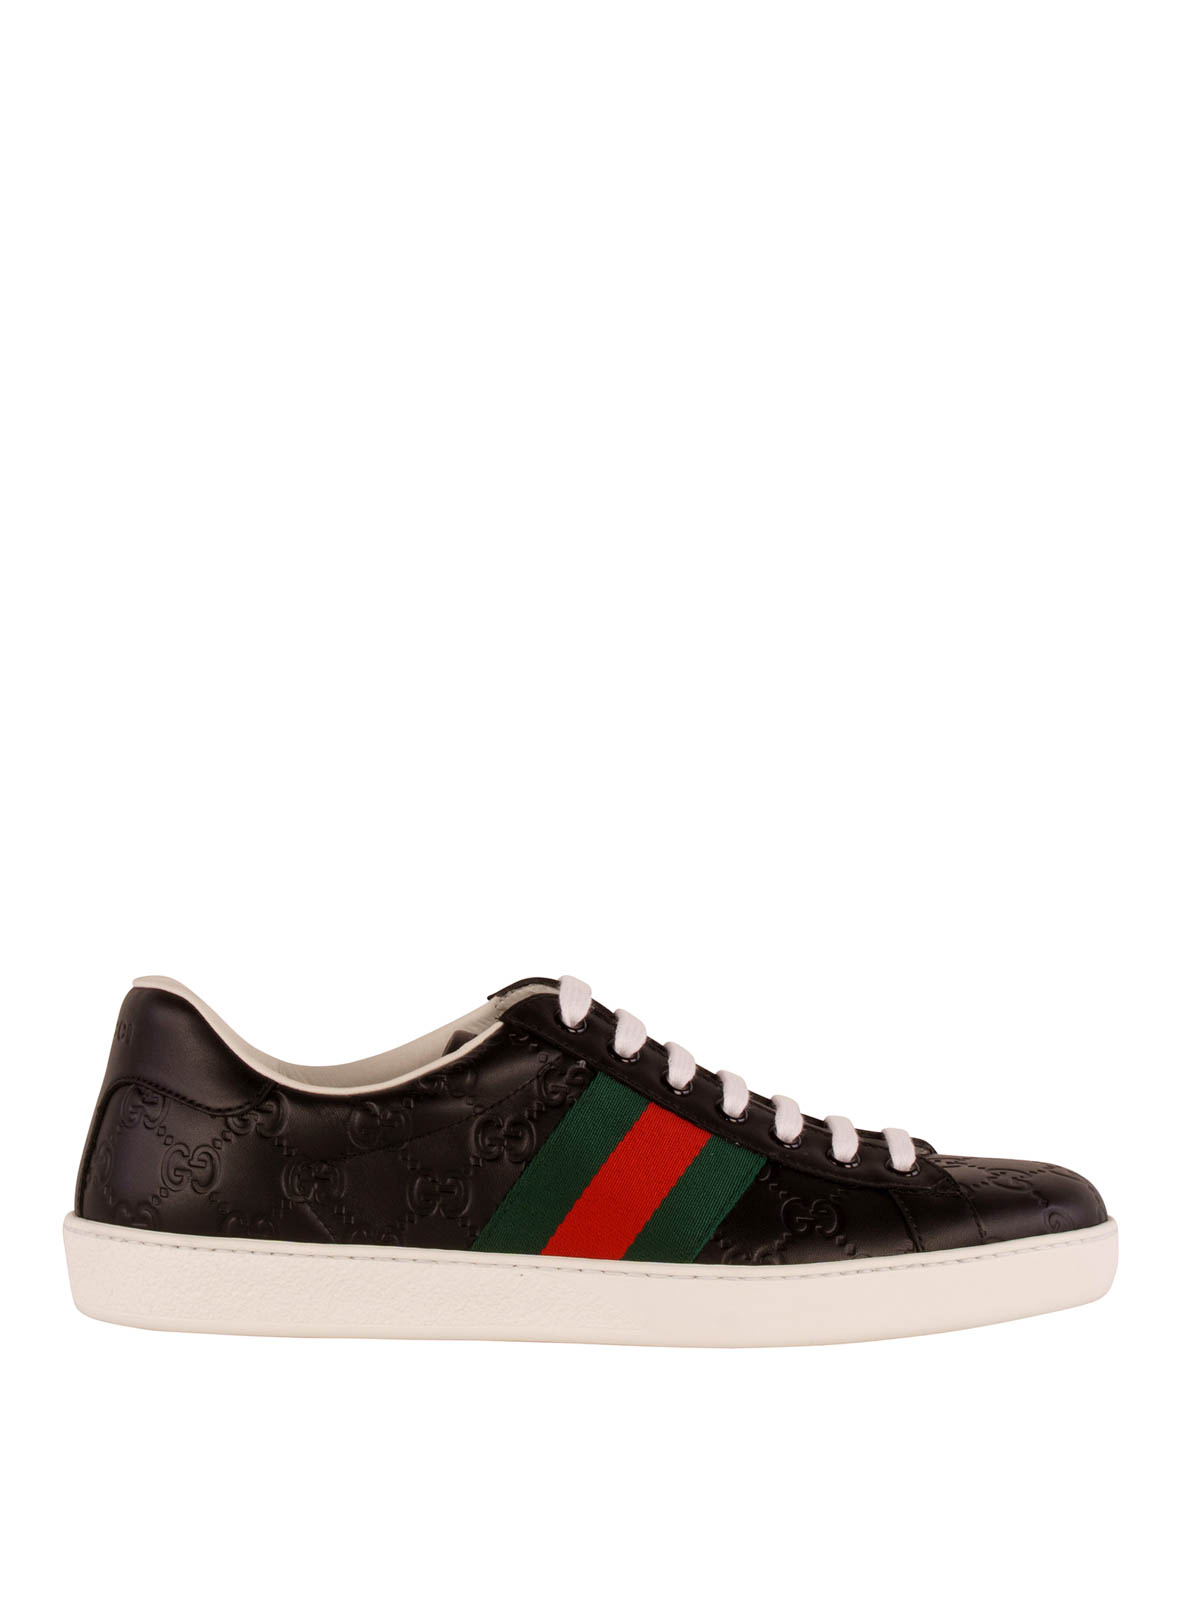 Gucci - Guccissima leather web sneakers - trainers - 386750 CWCG01070